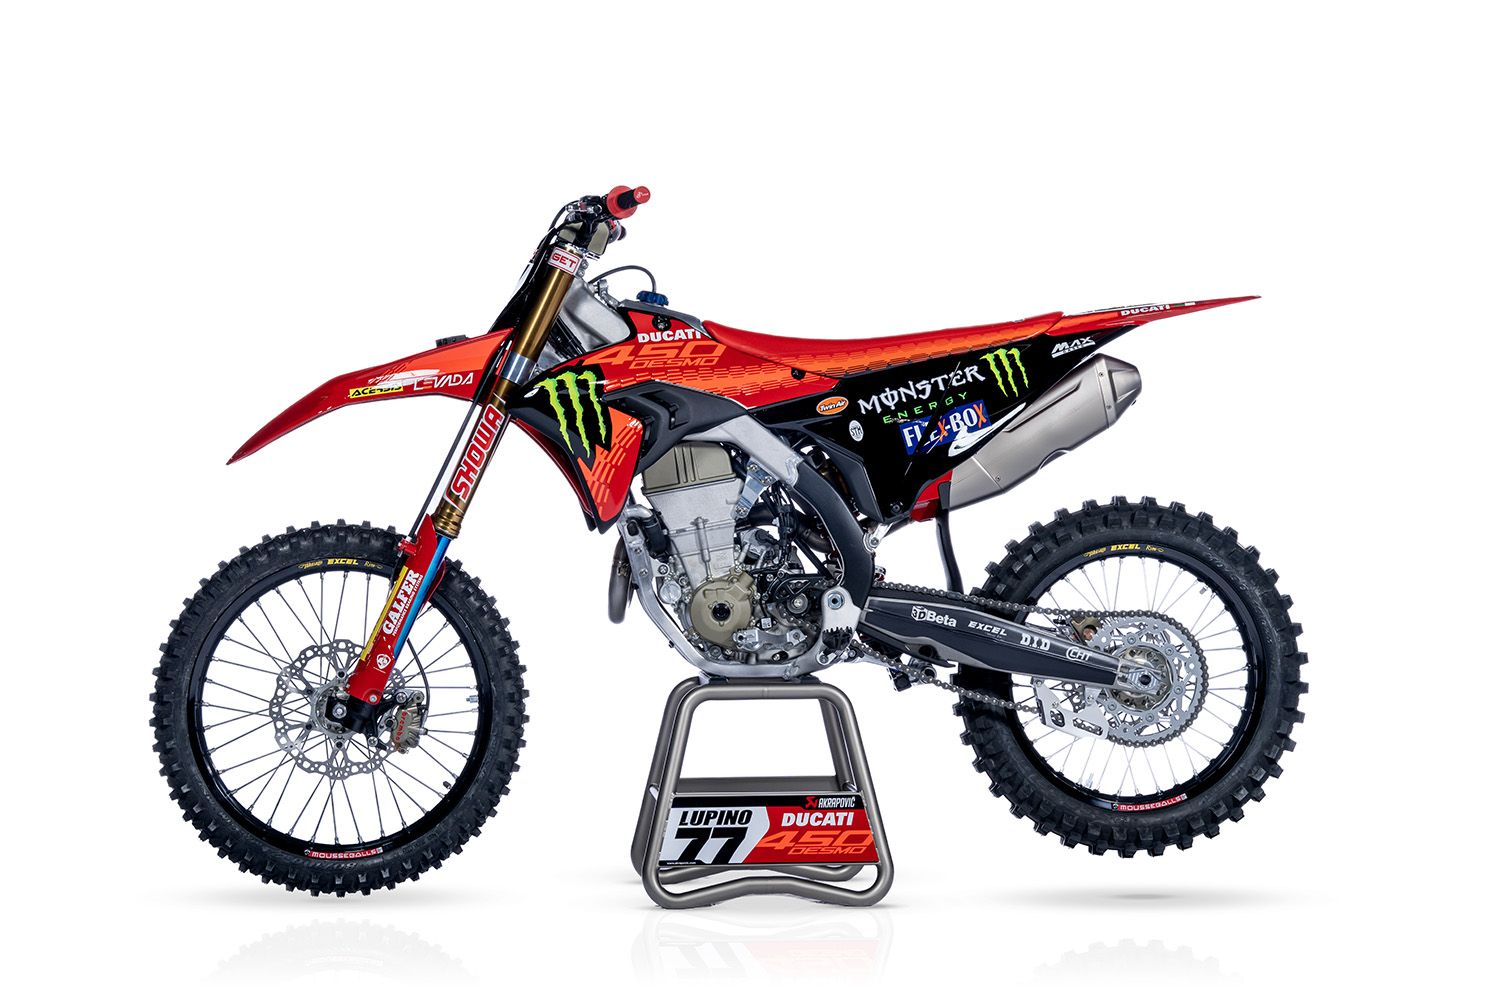 Official Announcement of the Ducati Desmo 450 Motocross Bike